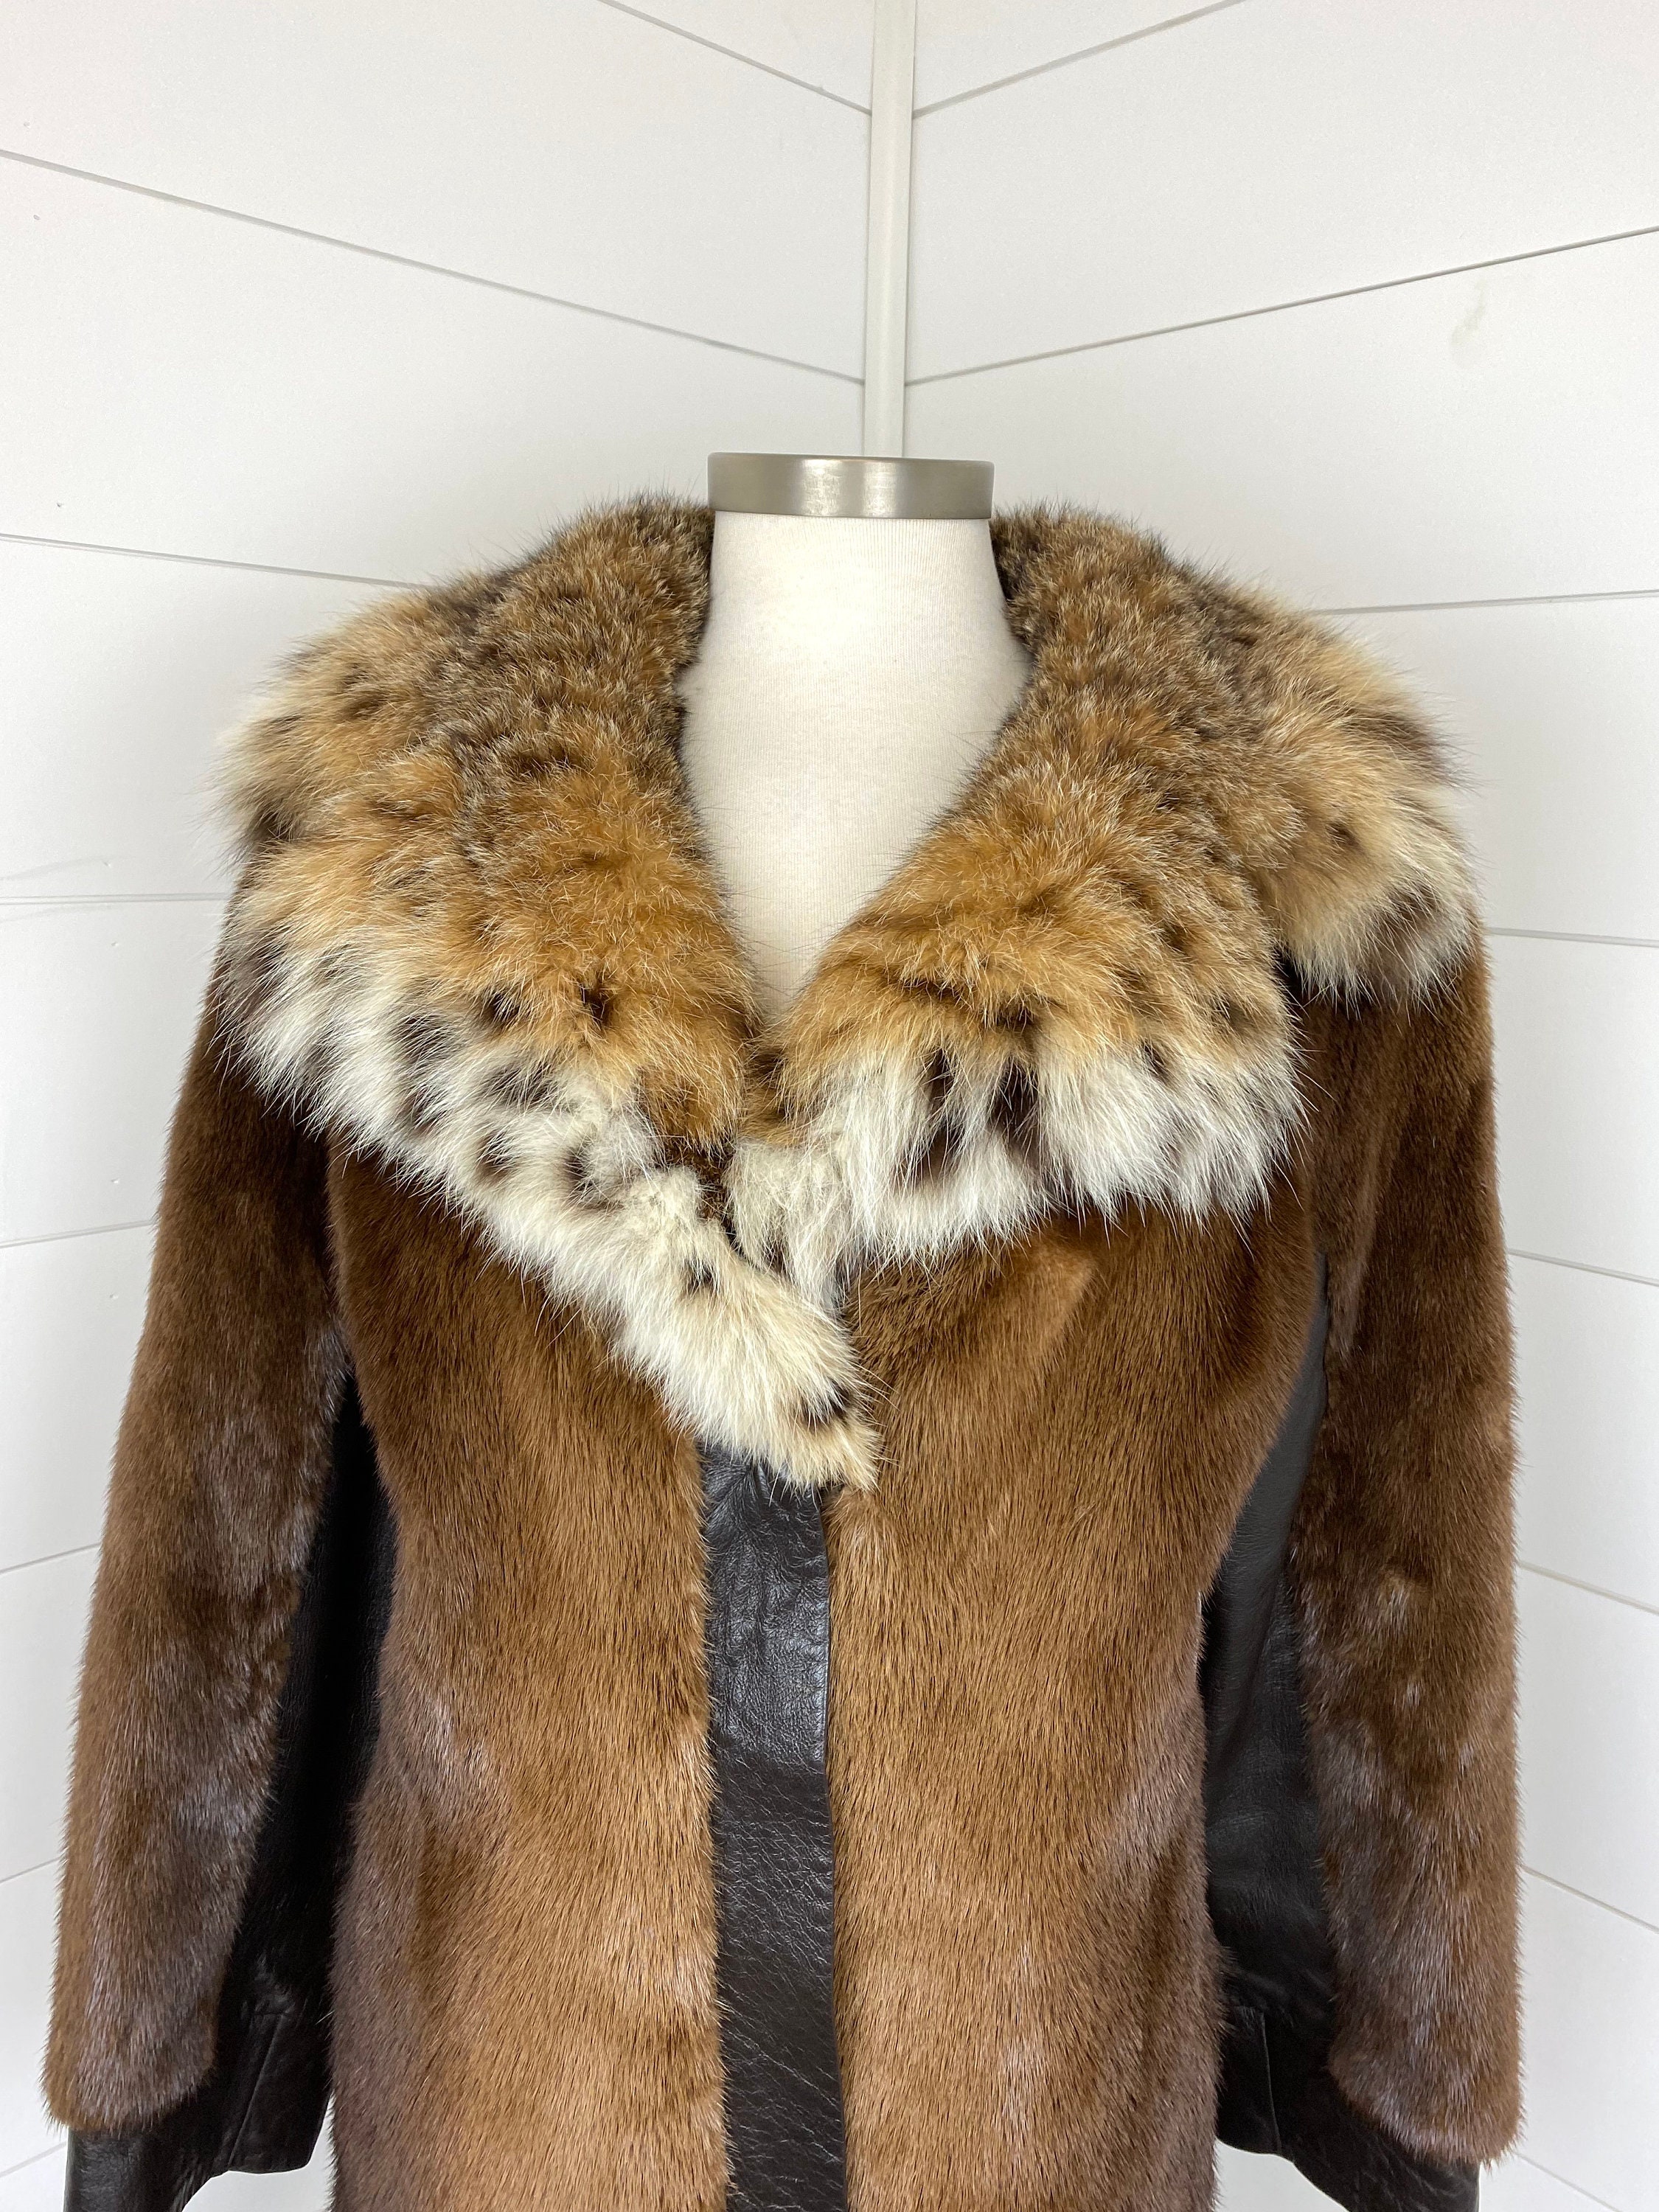 Day Furs Inc. Man's Medium Tone Long Hair Beaver Fur Jacket with Zip Out Leather Sleeves